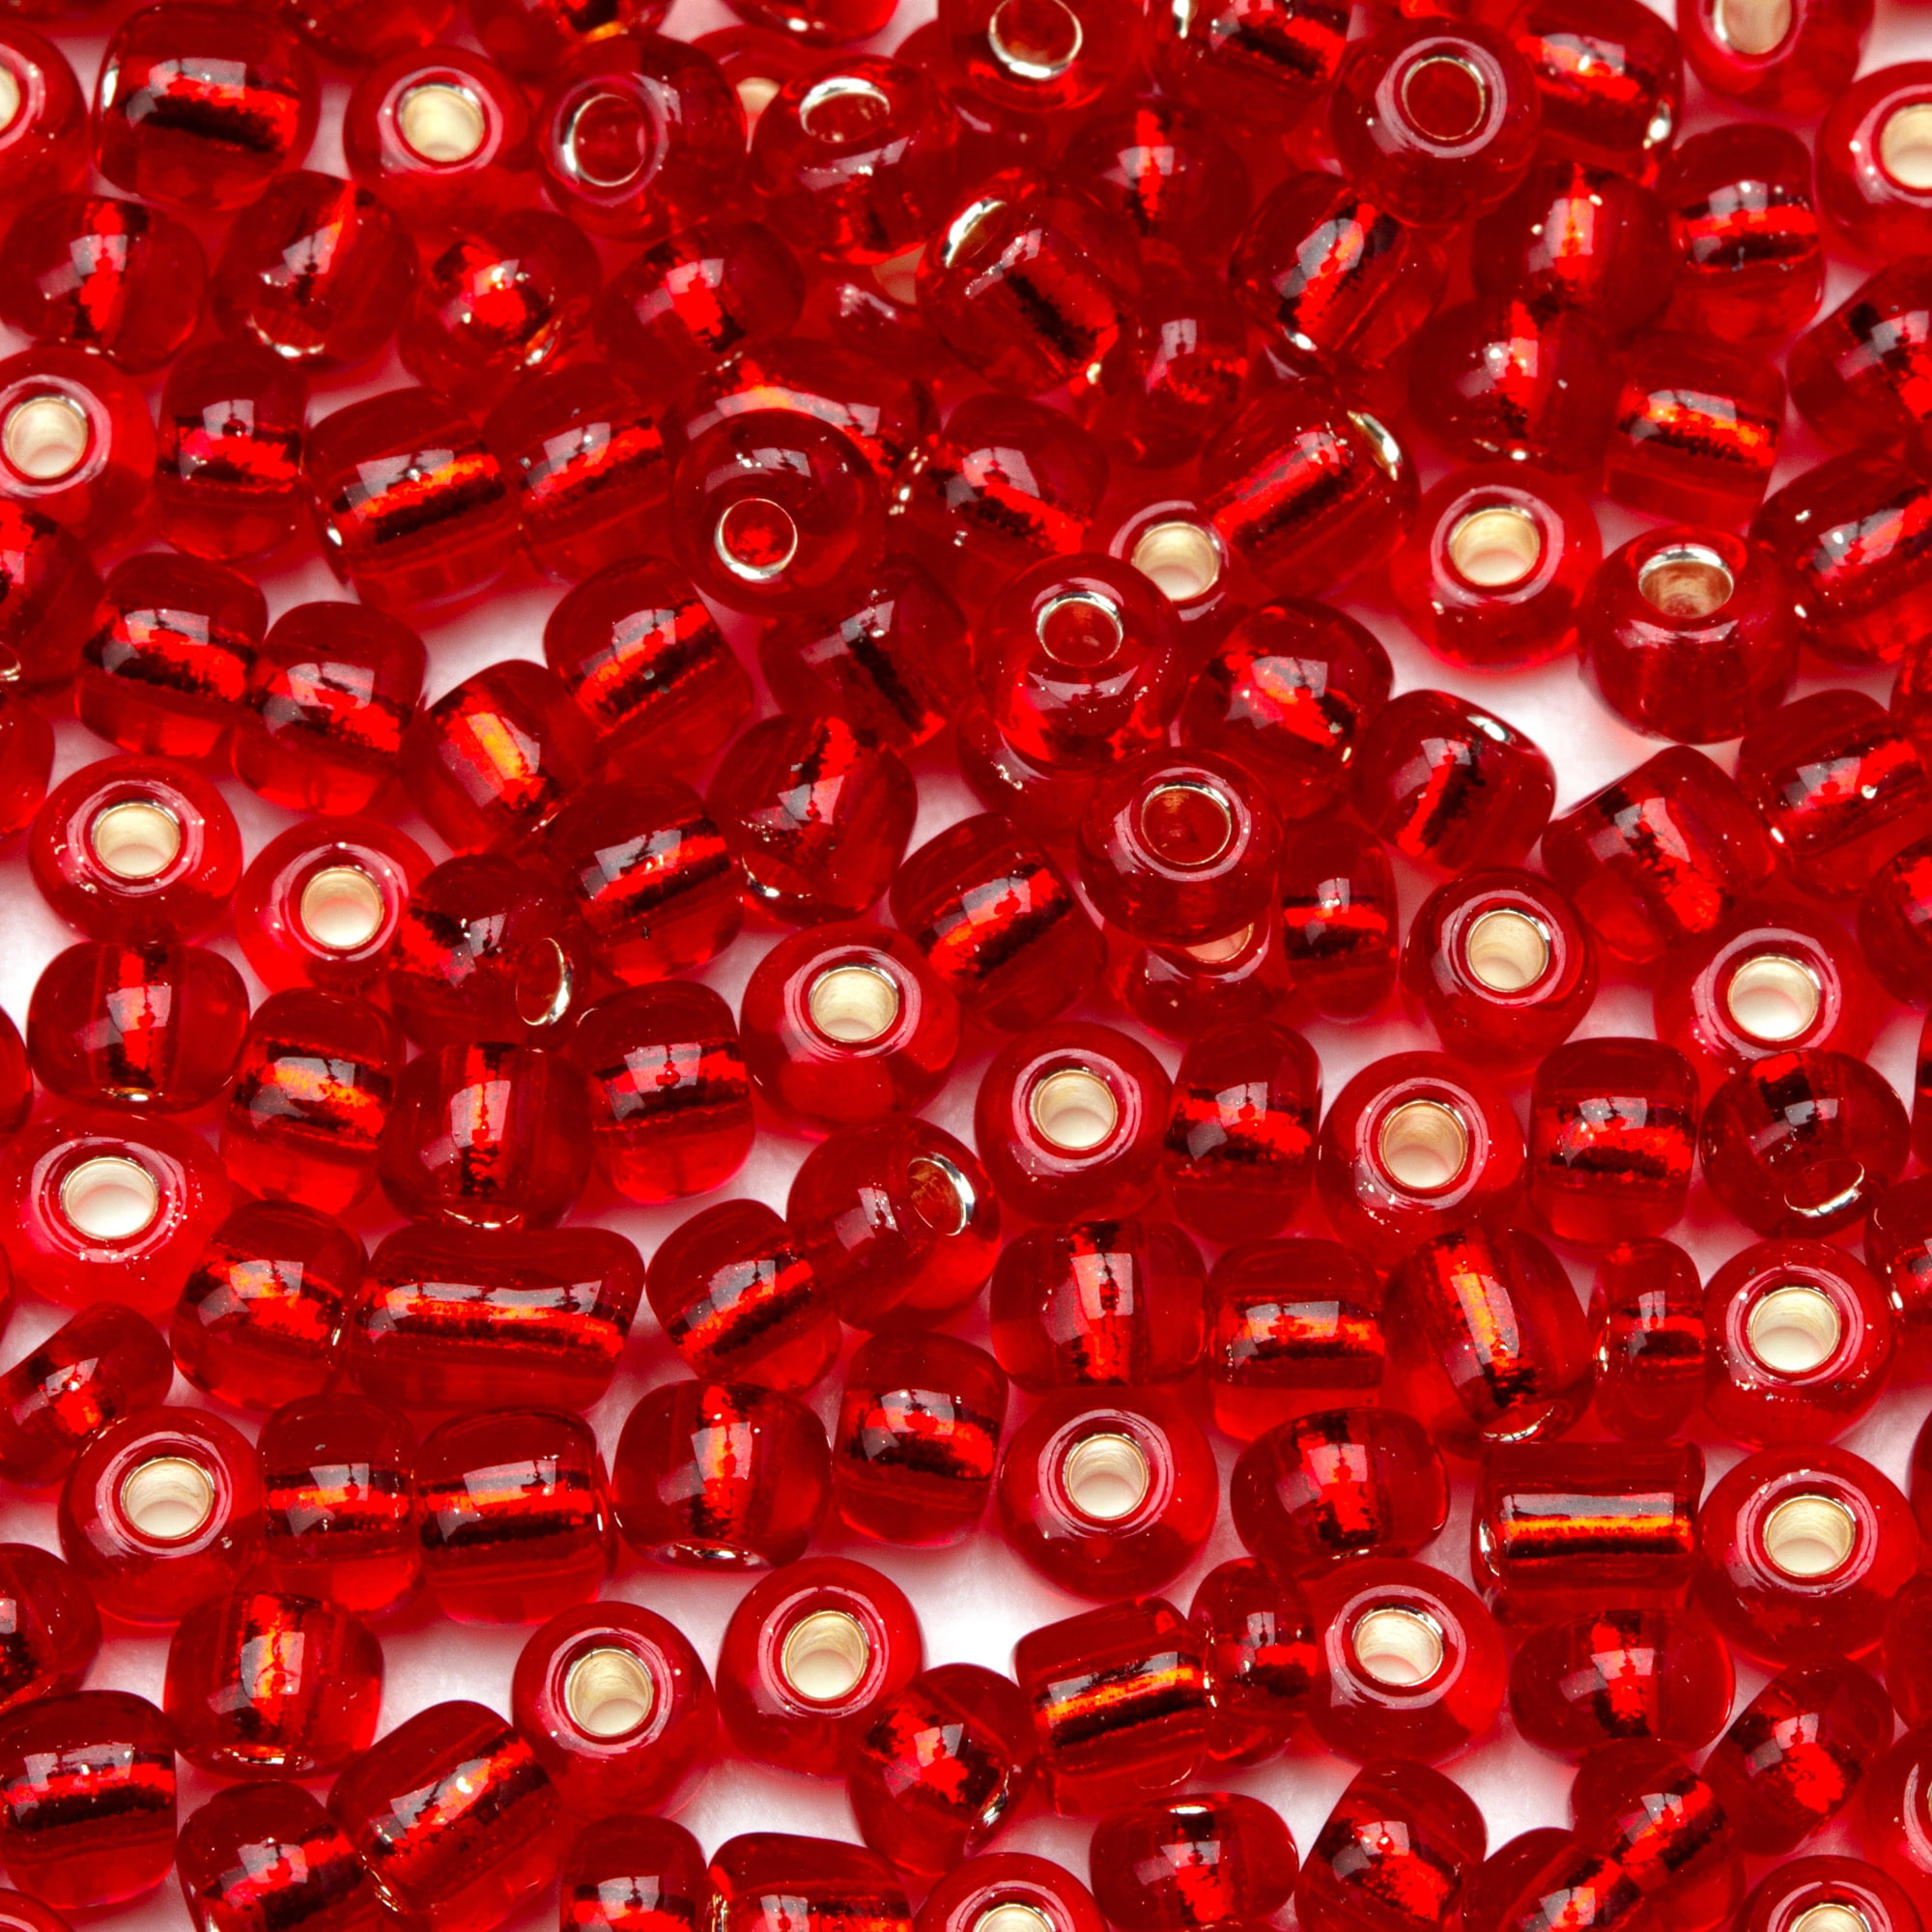 Cousin DIY Glass E-Beads, 100g Bulk Pack, 6/0, Red, 1000+ Pieces